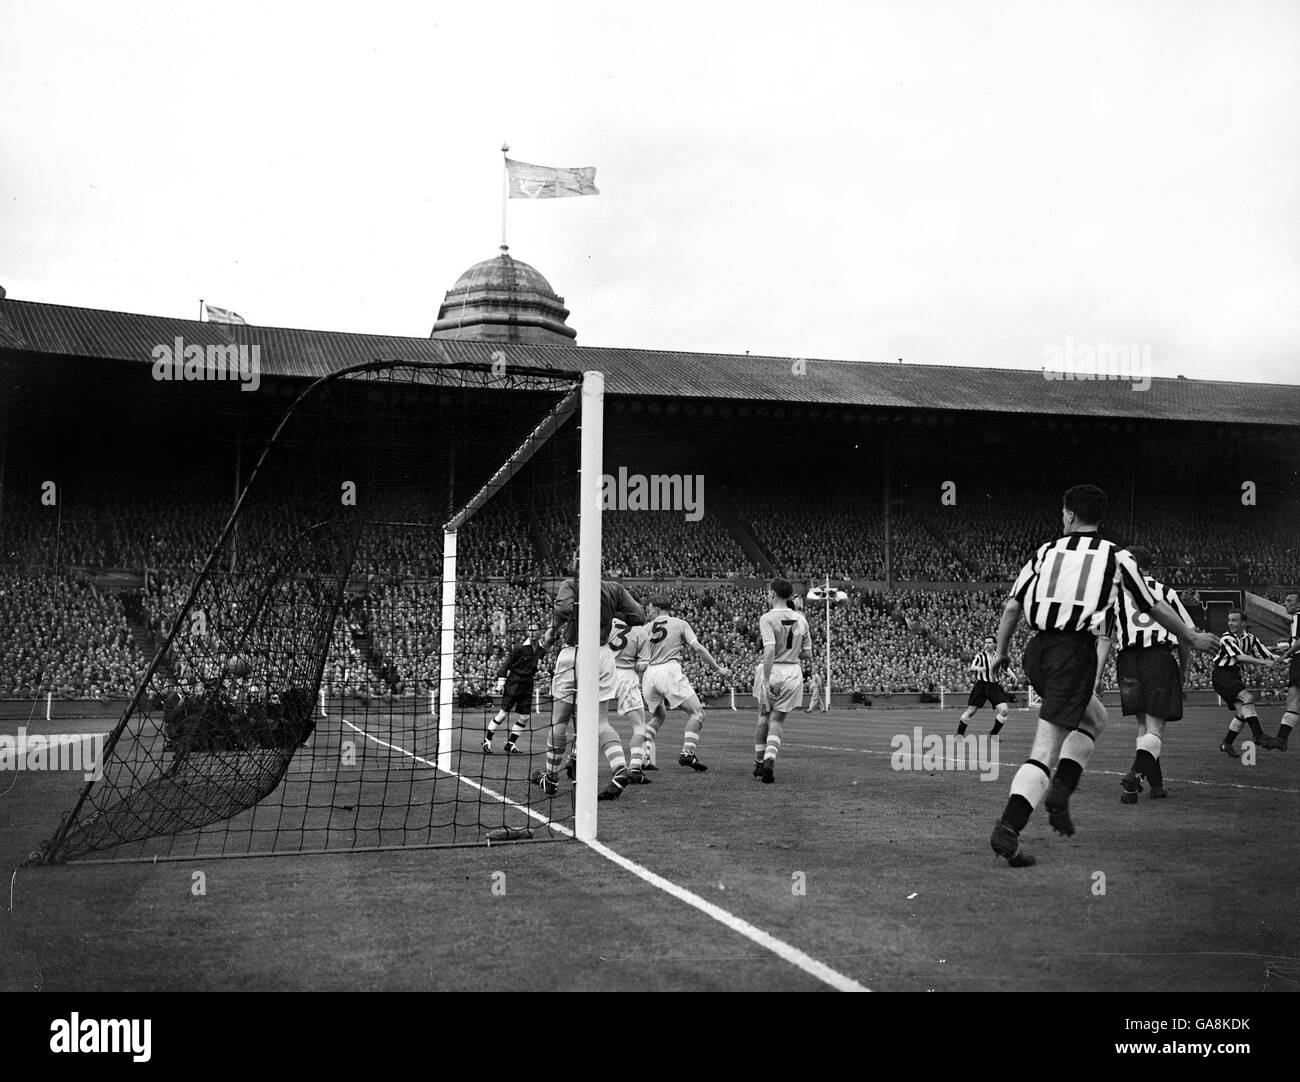 Soccer - FA Cup Final - Newcastle United v Manchester City - Wembley Stadium. Goalmouth action during the FA Cup Final at Wembley, Newcastle attacking. Stock Photo